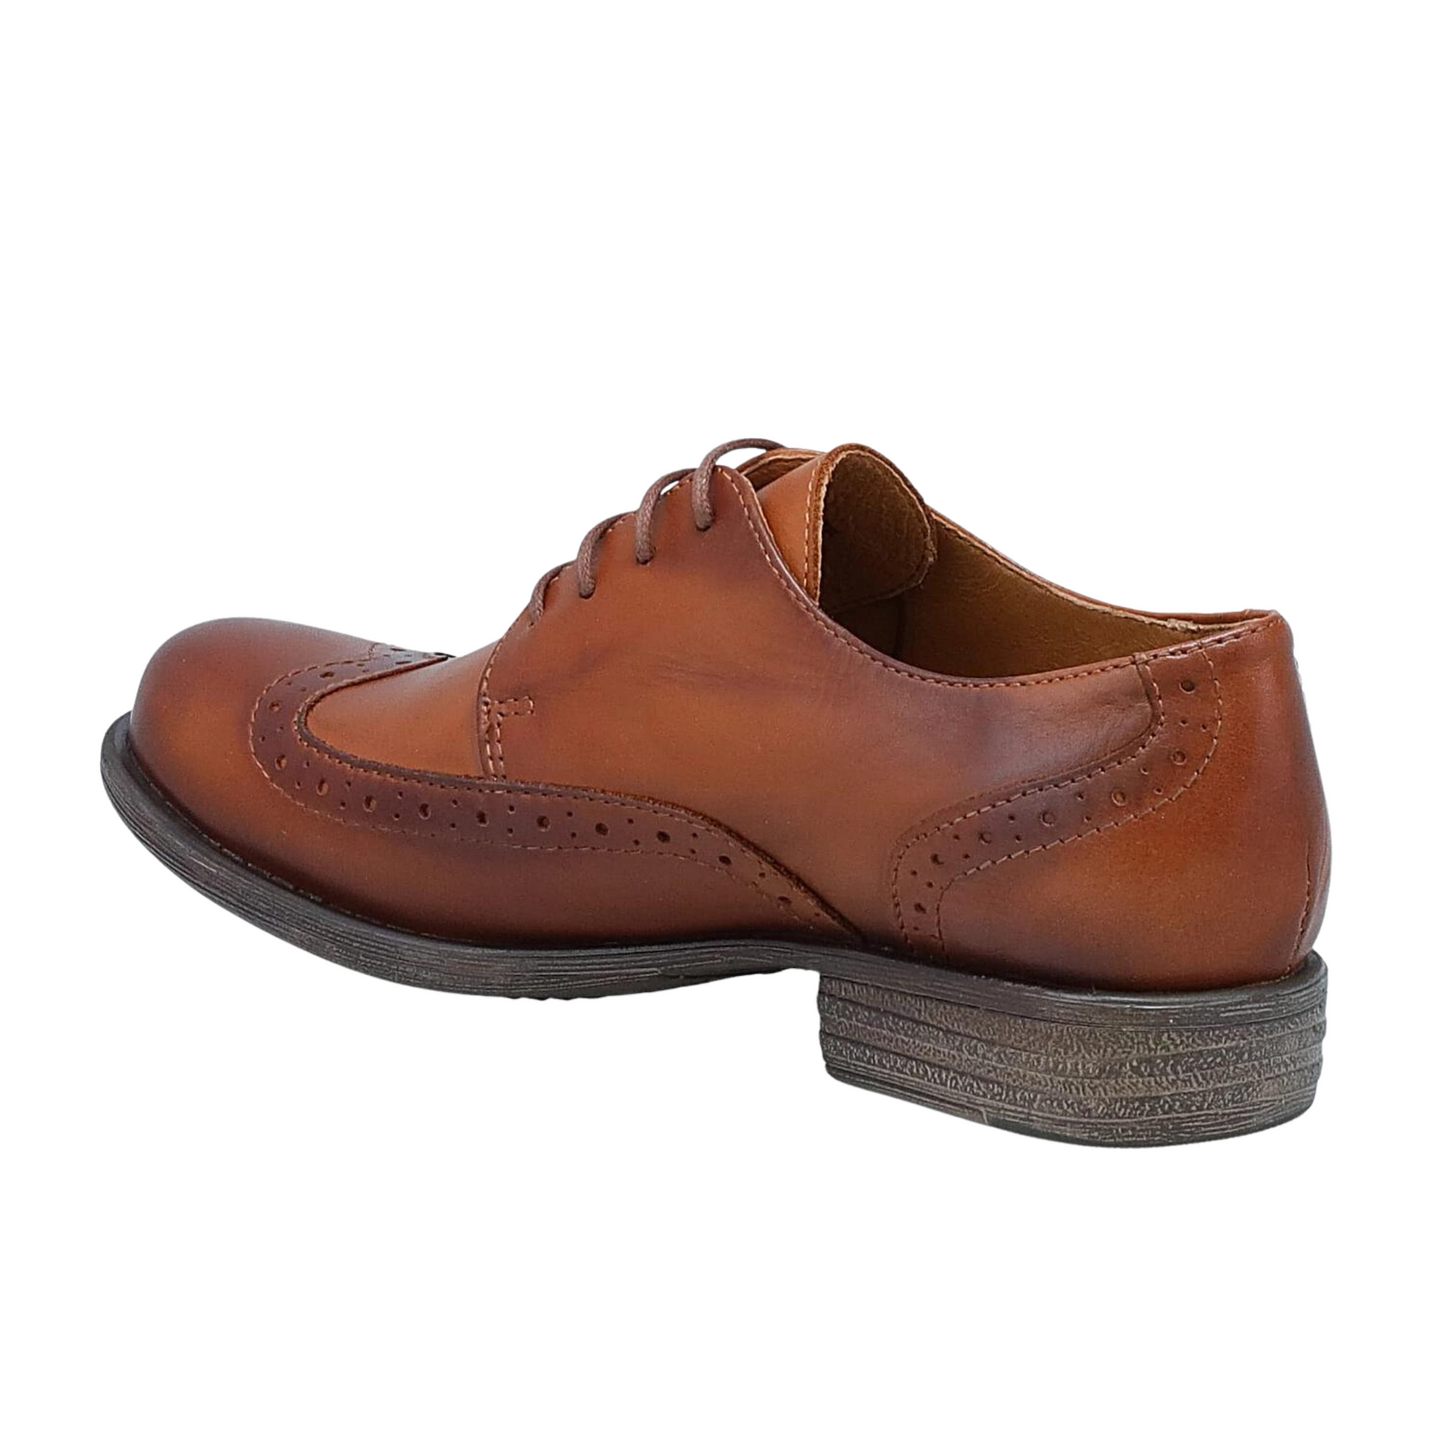 Rear angle profile of the Miz Mooz Luther Shoe in the colour Brandy.